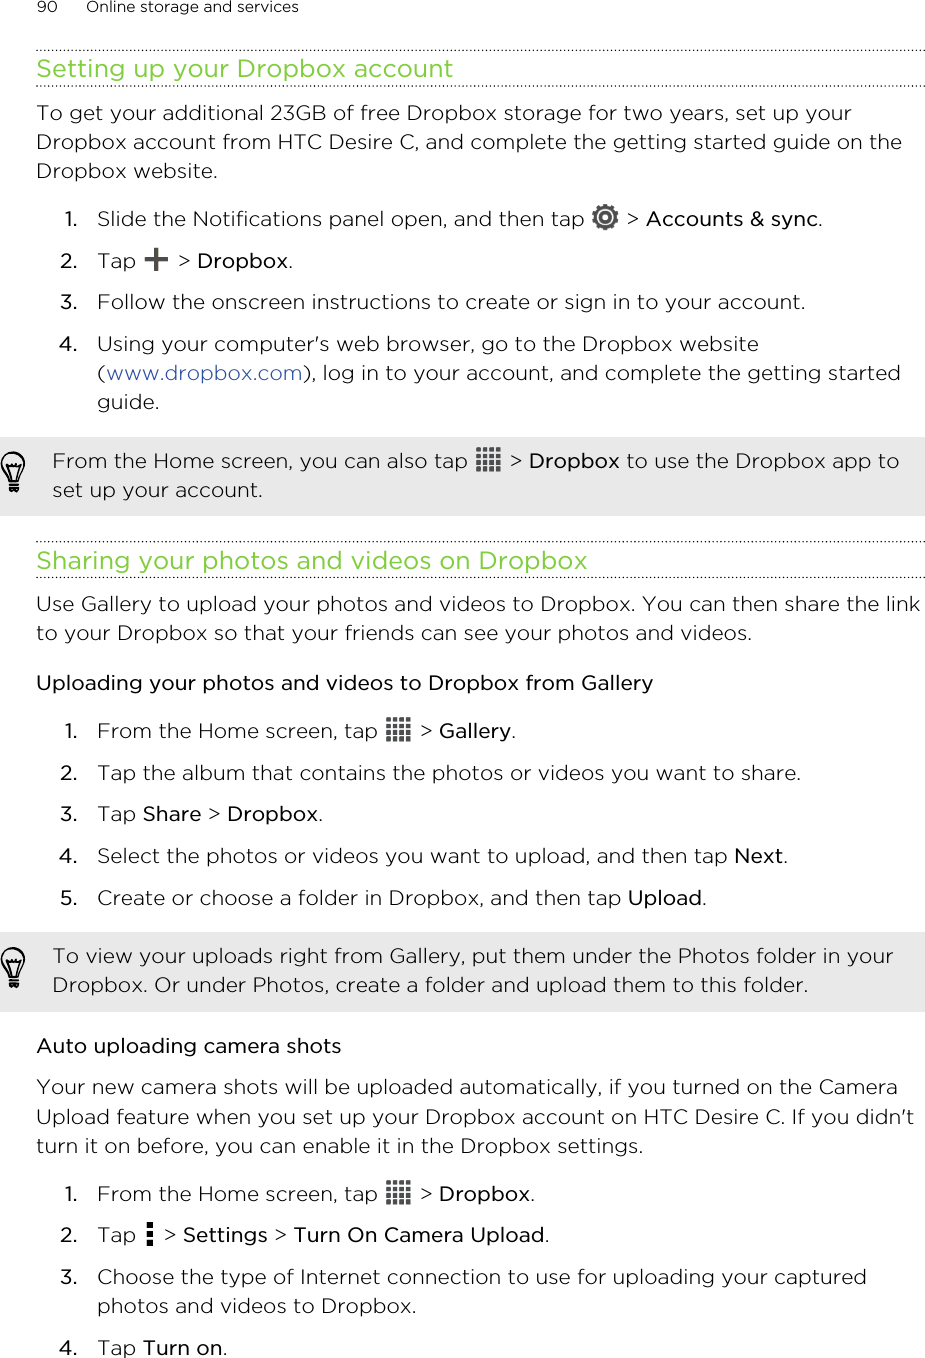 Setting up your Dropbox accountTo get your additional 23GB of free Dropbox storage for two years, set up yourDropbox account from HTC Desire C, and complete the getting started guide on theDropbox website.1. Slide the Notifications panel open, and then tap   &gt; Accounts &amp; sync.2. Tap   &gt; Dropbox.3. Follow the onscreen instructions to create or sign in to your account.4. Using your computer&apos;s web browser, go to the Dropbox website(www.dropbox.com), log in to your account, and complete the getting startedguide.From the Home screen, you can also tap   &gt; Dropbox to use the Dropbox app toset up your account.Sharing your photos and videos on DropboxUse Gallery to upload your photos and videos to Dropbox. You can then share the linkto your Dropbox so that your friends can see your photos and videos.Uploading your photos and videos to Dropbox from Gallery1. From the Home screen, tap   &gt; Gallery.2. Tap the album that contains the photos or videos you want to share.3. Tap Share &gt; Dropbox.4. Select the photos or videos you want to upload, and then tap Next.5. Create or choose a folder in Dropbox, and then tap Upload.To view your uploads right from Gallery, put them under the Photos folder in yourDropbox. Or under Photos, create a folder and upload them to this folder.Auto uploading camera shotsYour new camera shots will be uploaded automatically, if you turned on the CameraUpload feature when you set up your Dropbox account on HTC Desire C. If you didn&apos;tturn it on before, you can enable it in the Dropbox settings.1. From the Home screen, tap   &gt; Dropbox.2. Tap   &gt; Settings &gt; Turn On Camera Upload.3. Choose the type of Internet connection to use for uploading your capturedphotos and videos to Dropbox.4. Tap Turn on.90 Online storage and services